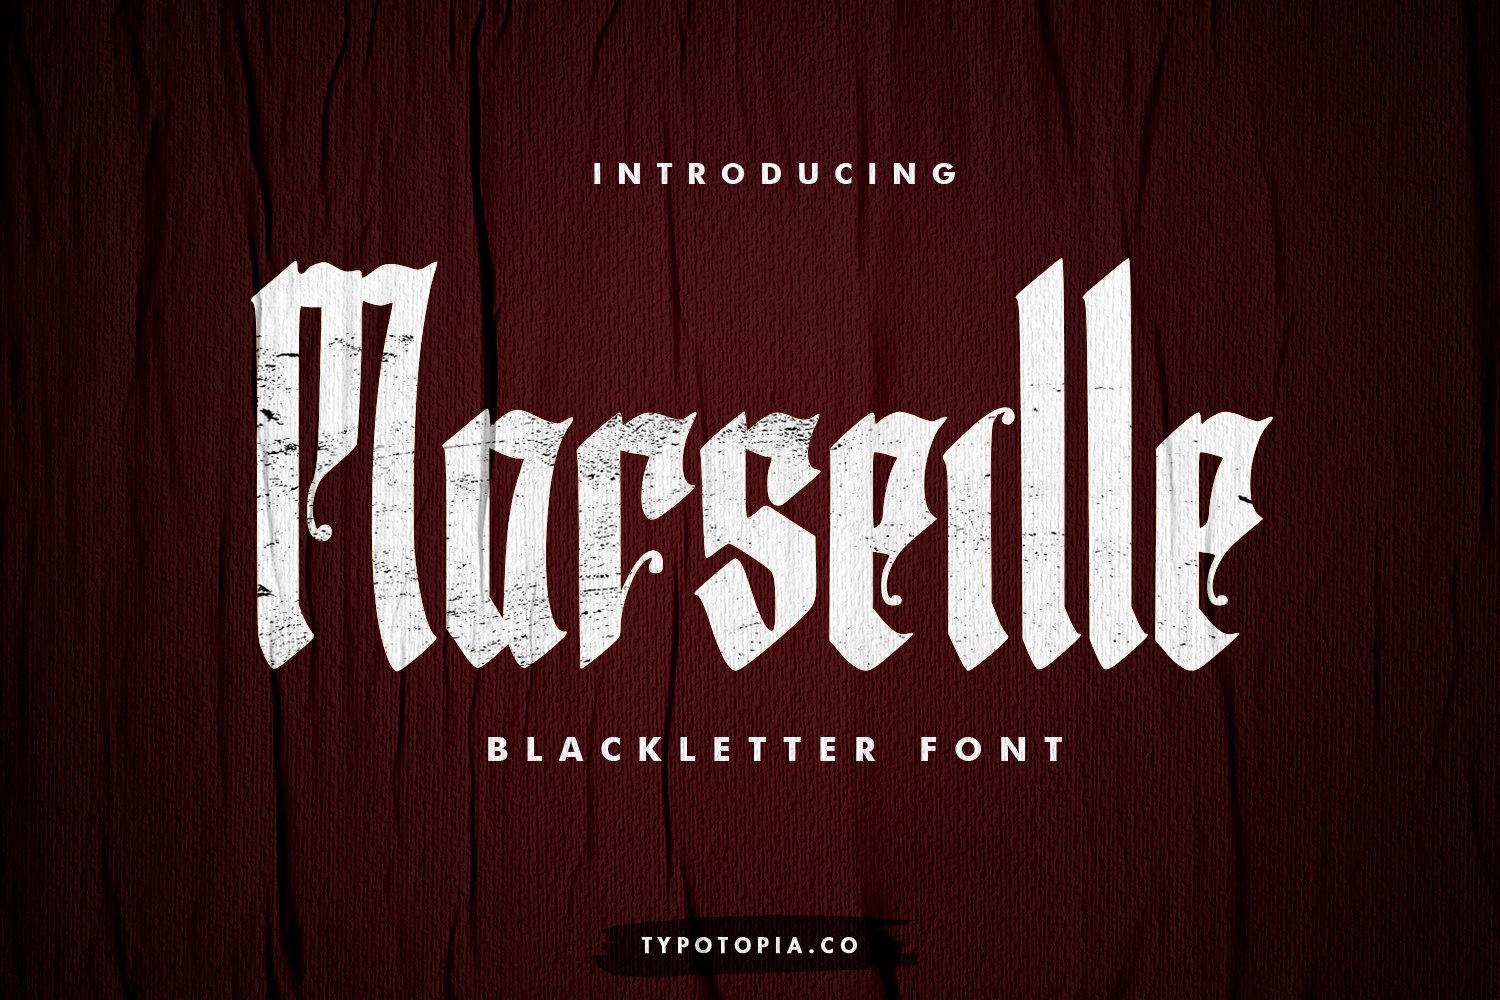 Marseille - Blackletter Typeface cover image.